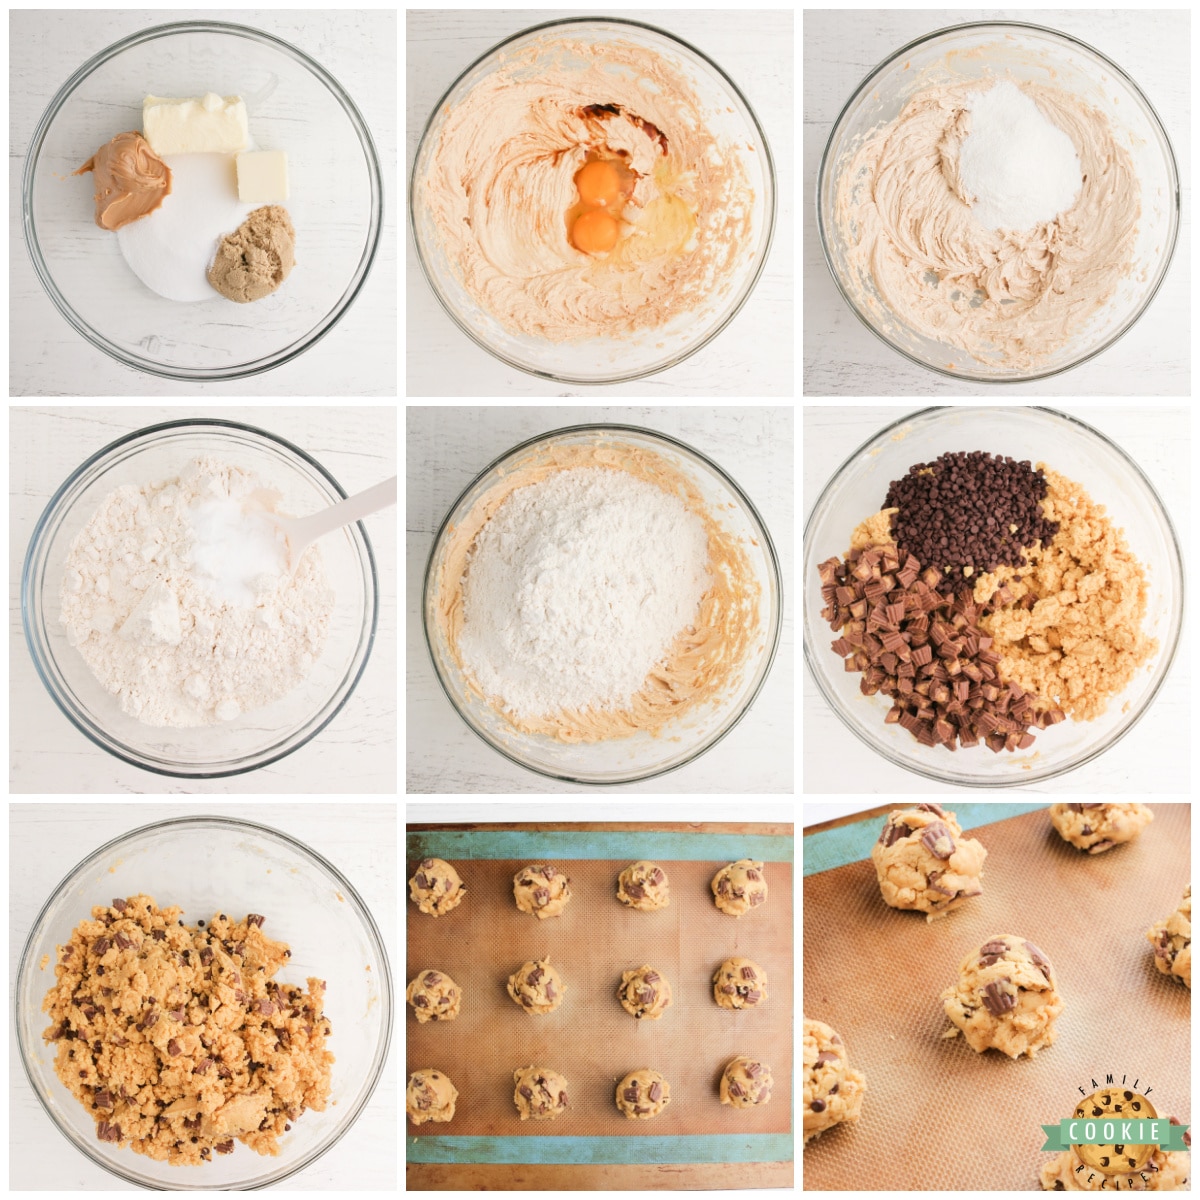 Step by step instructions on how to make Reese's Peanut Butter Banana Cookies